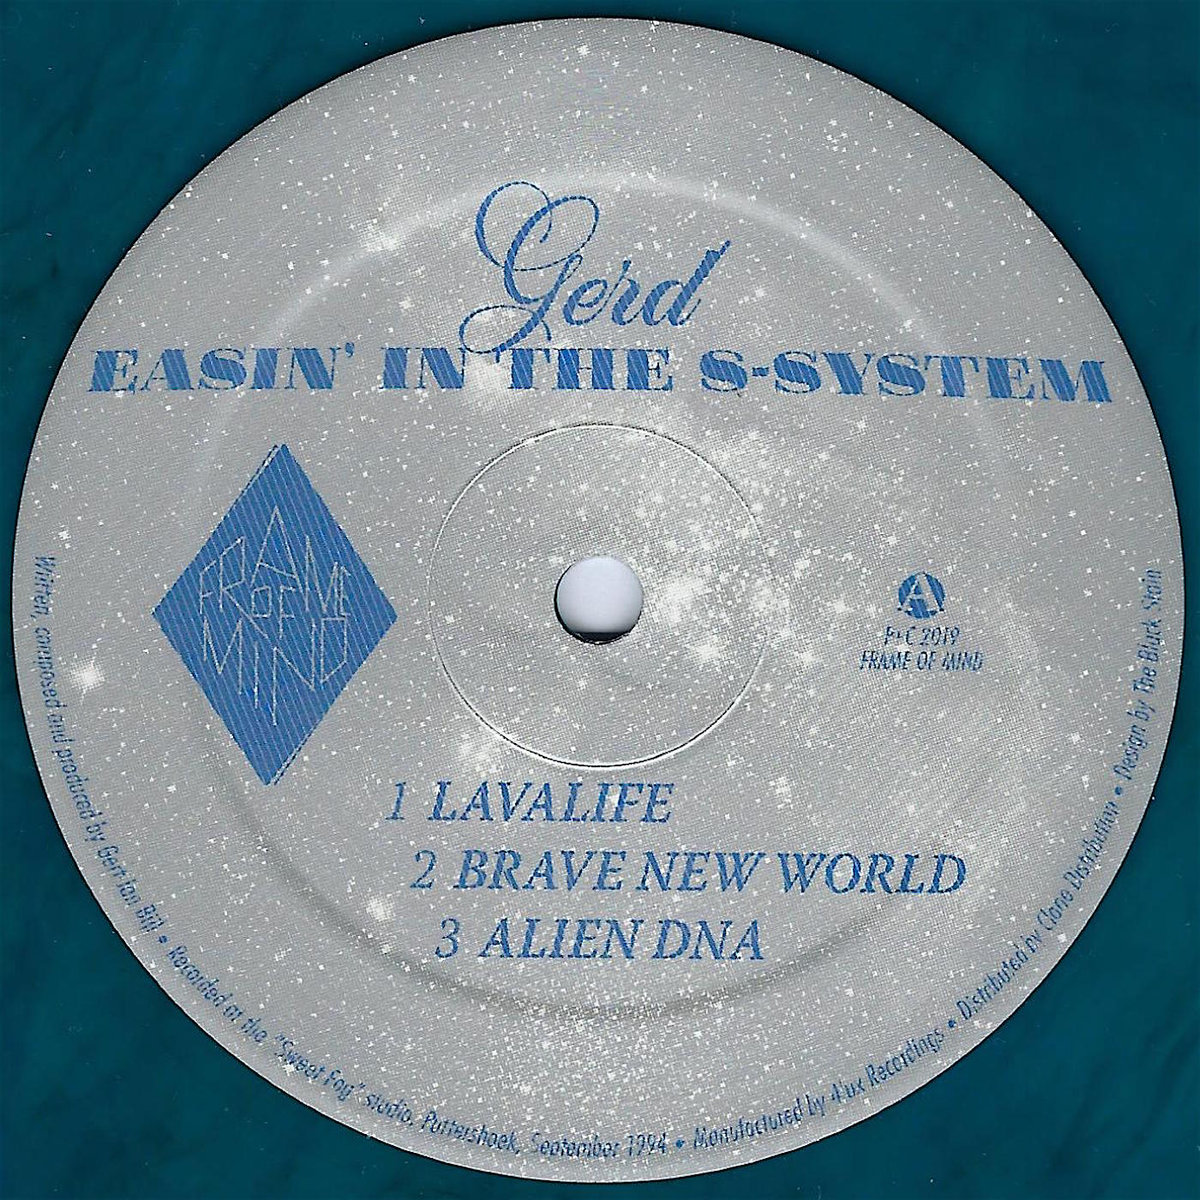 Download Gerd - Easin' In The S-System on Electrobuzz